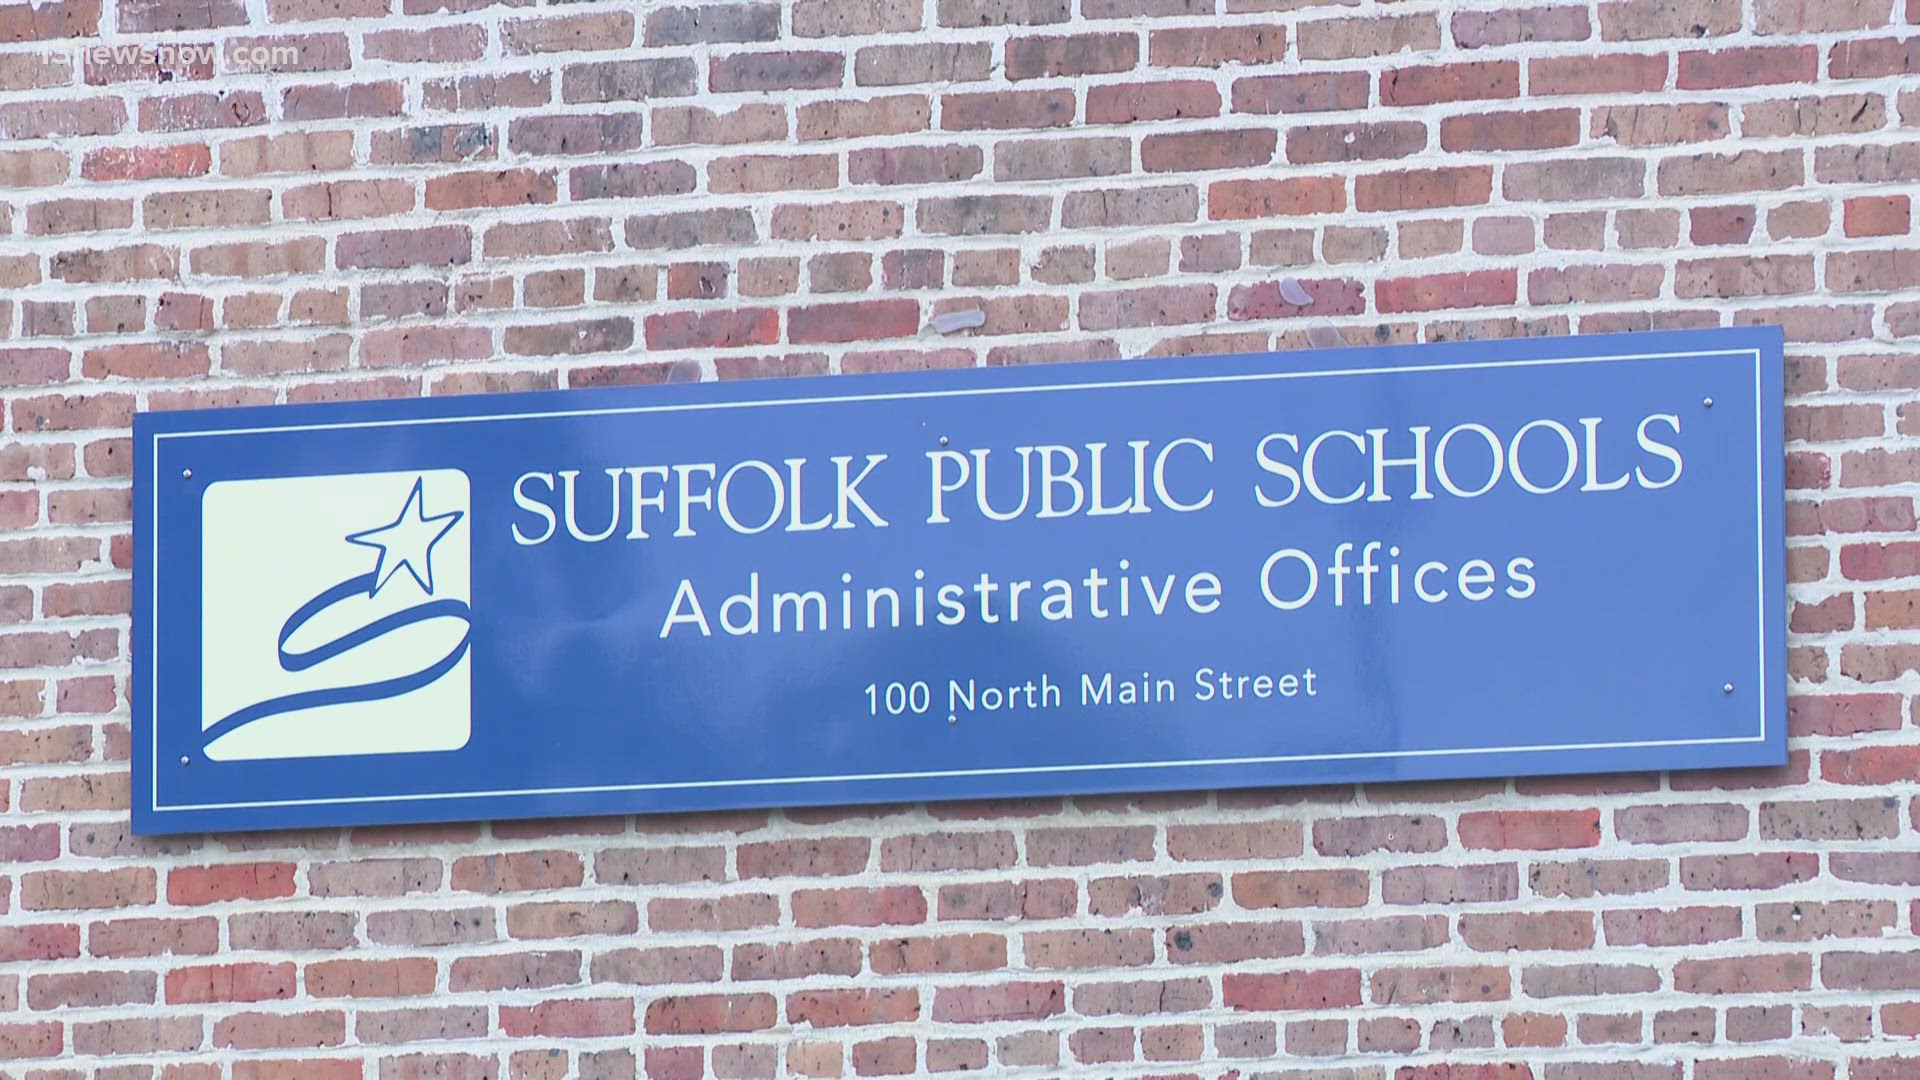 Now to a heads up for families in Suffolk: the school board is considering rezoning its elementary schools.